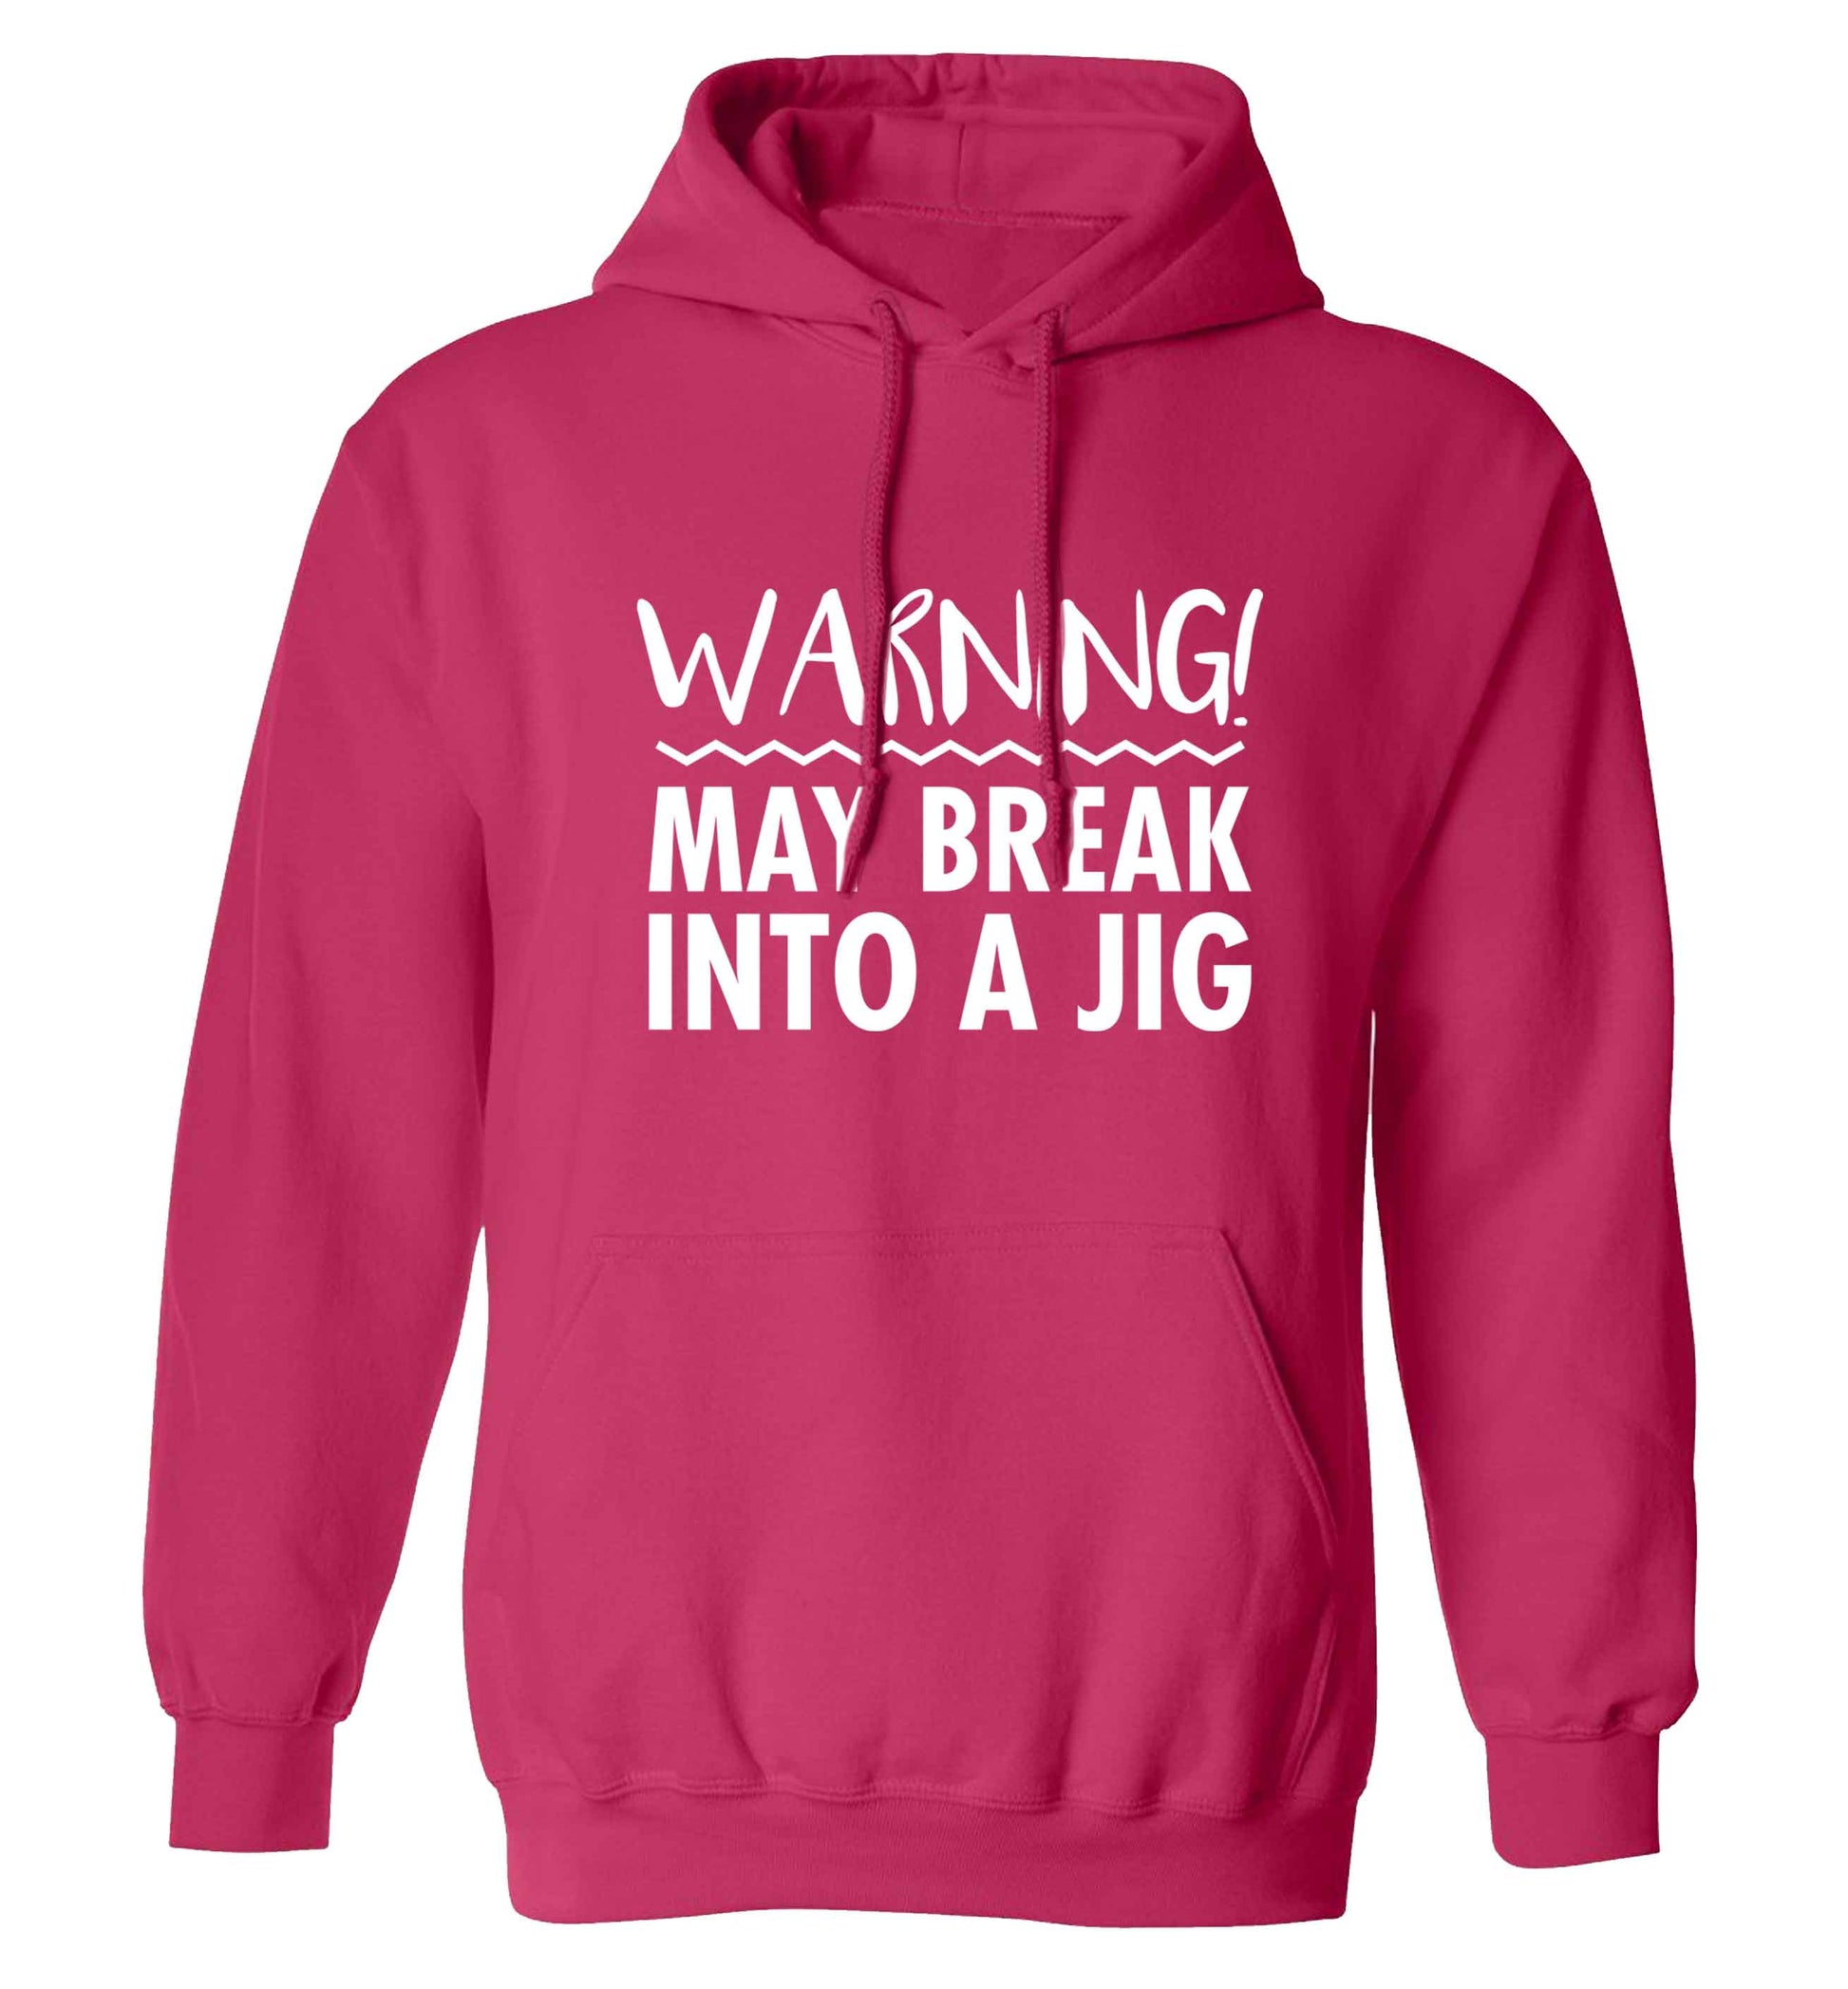 Warning may break into a jig adults unisex pink hoodie 2XL